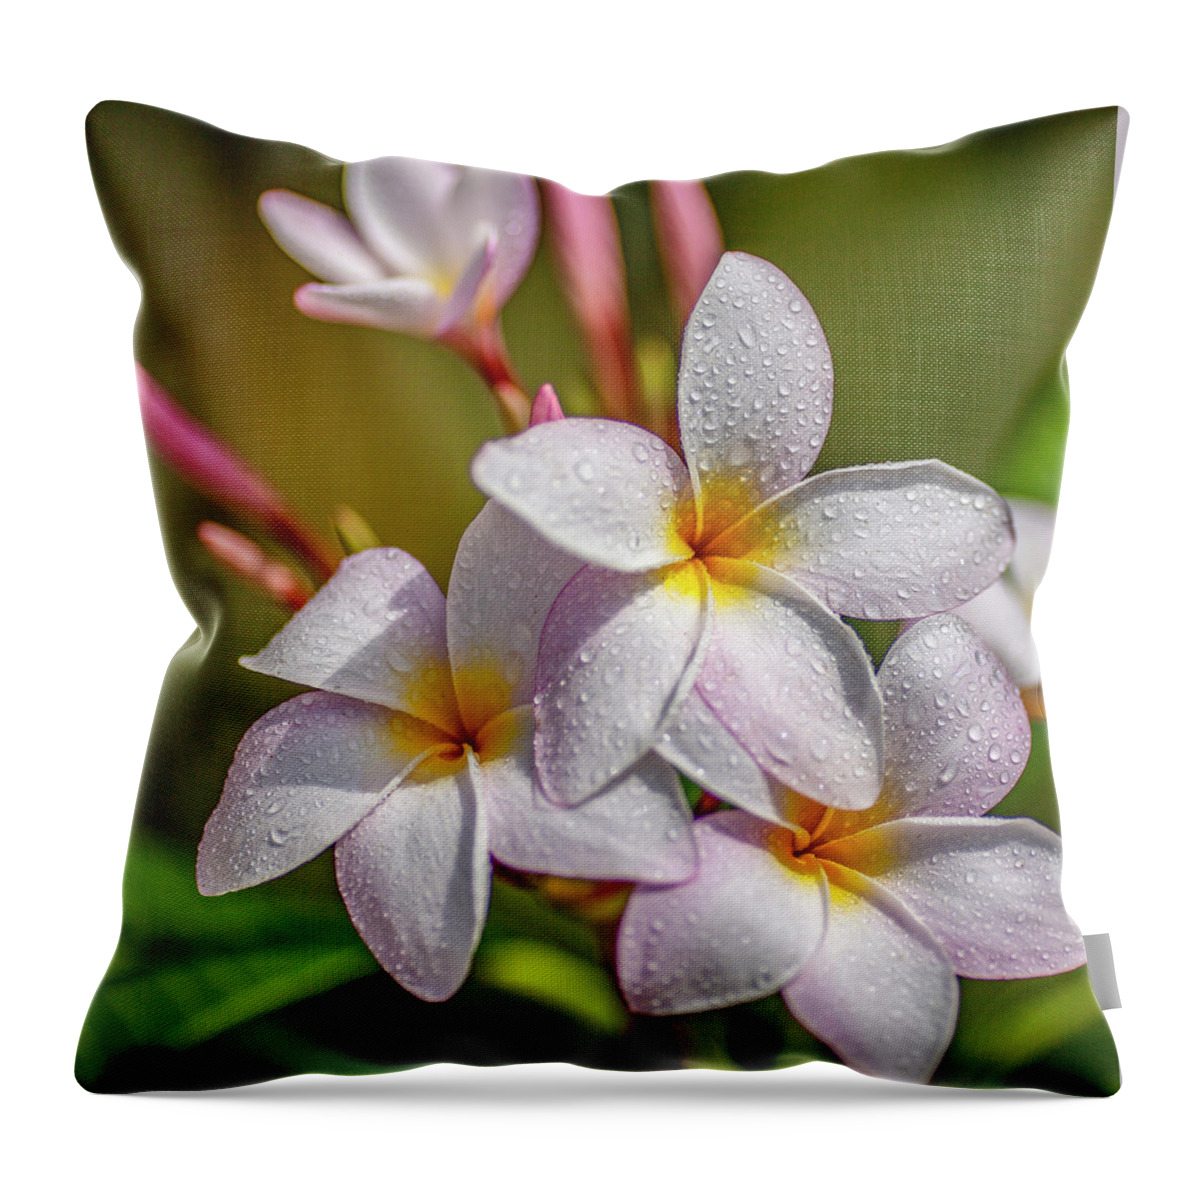 Tropical Throw Pillow featuring the photograph Plumeria 2 by Al Hurley